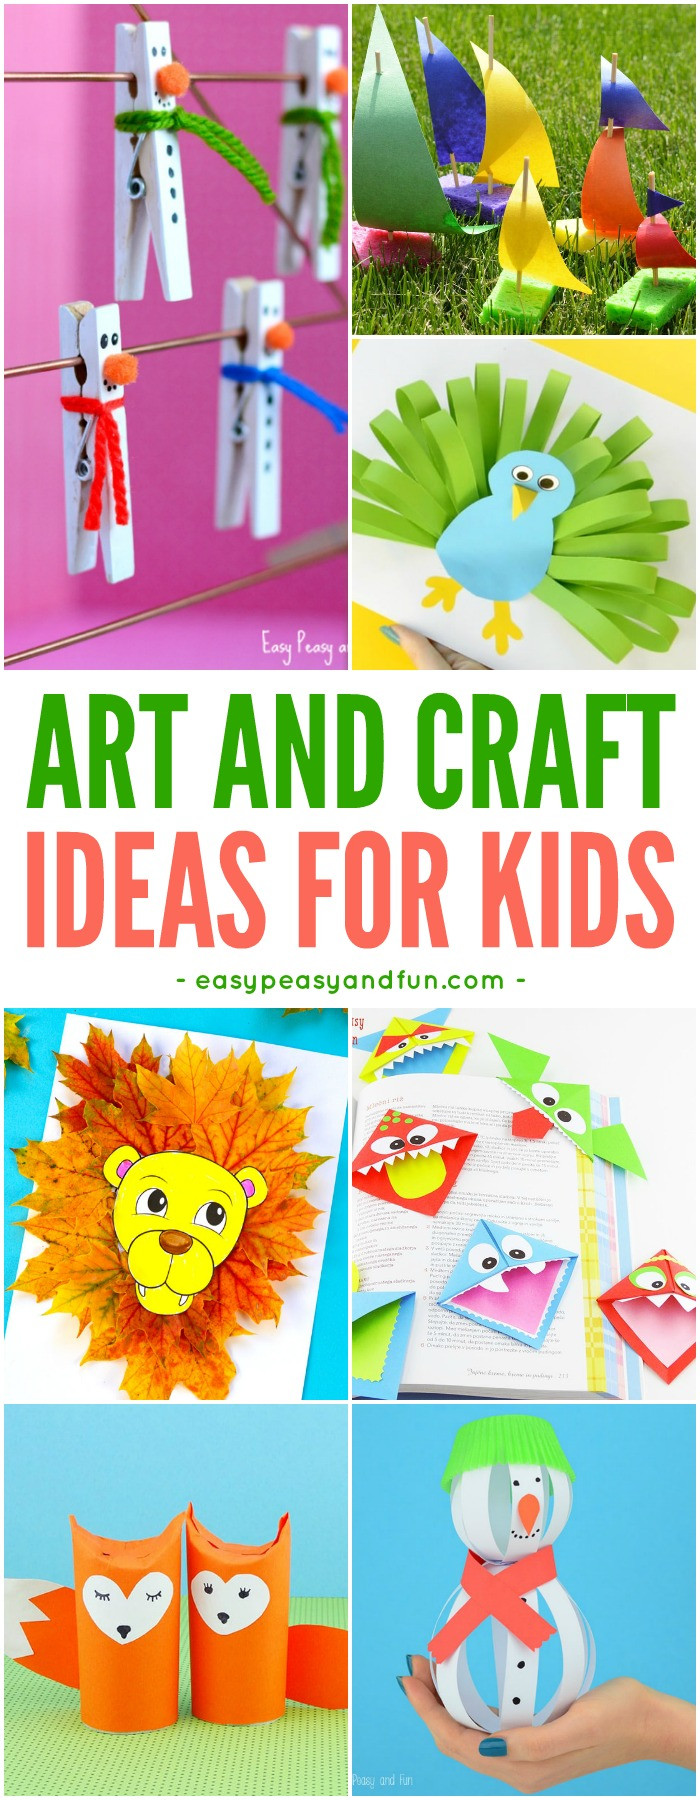 Simple Art Projects For Toddlers
 Crafts For Kids Tons of Art and Craft Ideas for Kids to